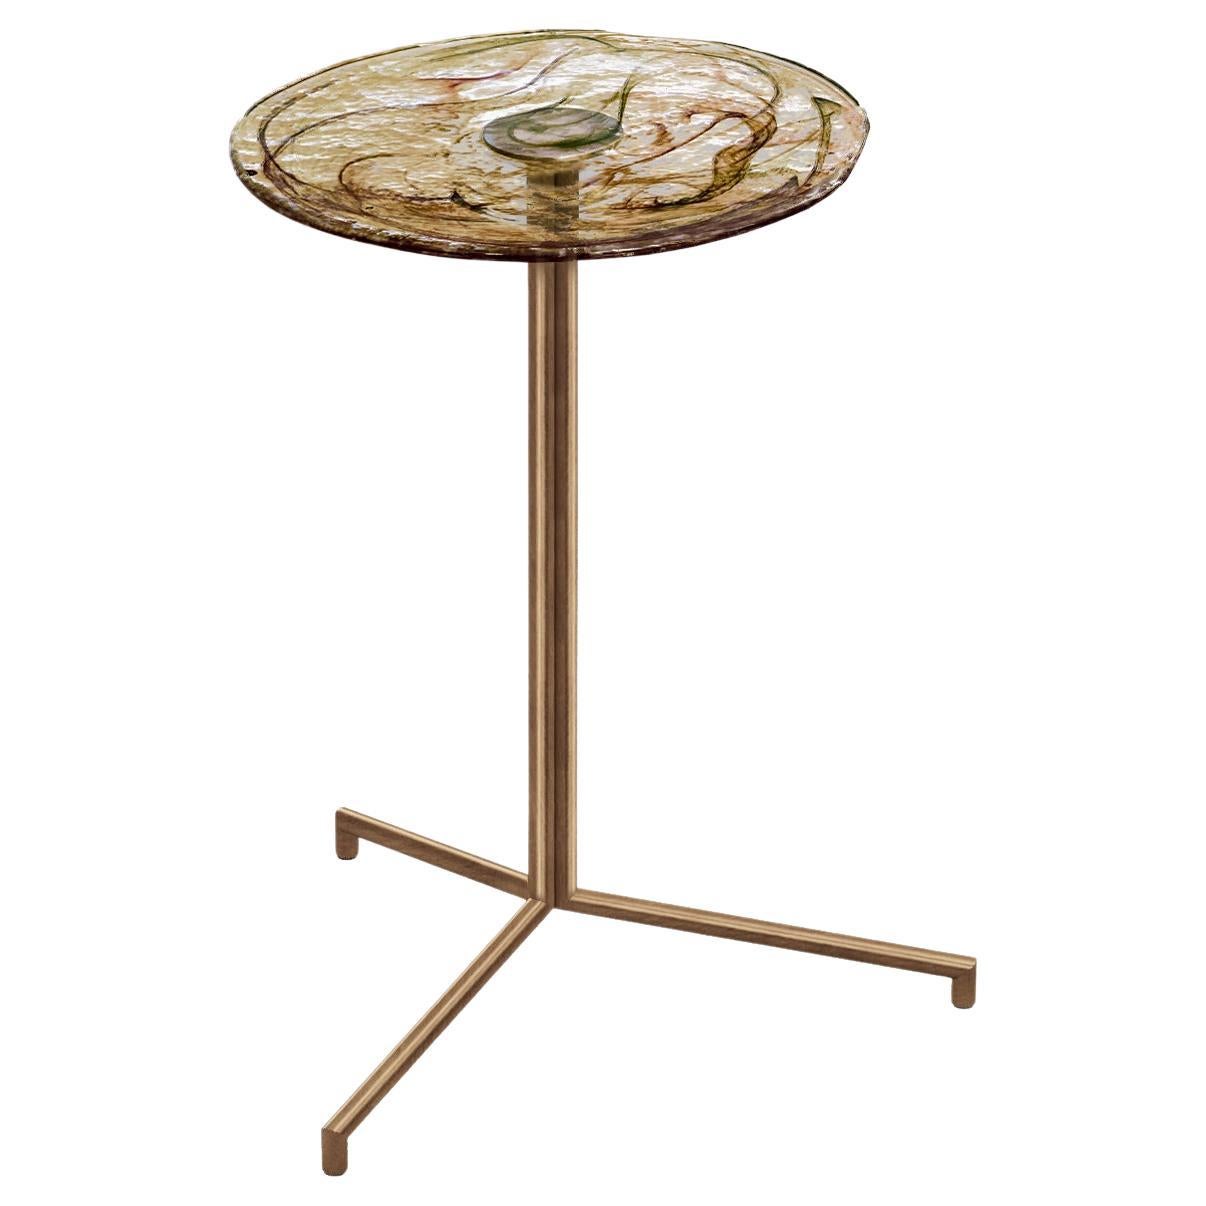 Flat Glass is the prefect unity of artisanal hand work and machine work. Glass part is produced by sculptor Tina Varon. Due to artisanal hand work of glass, each flat side table is one-of-a-kind. There may be slight differences in the dimensions due